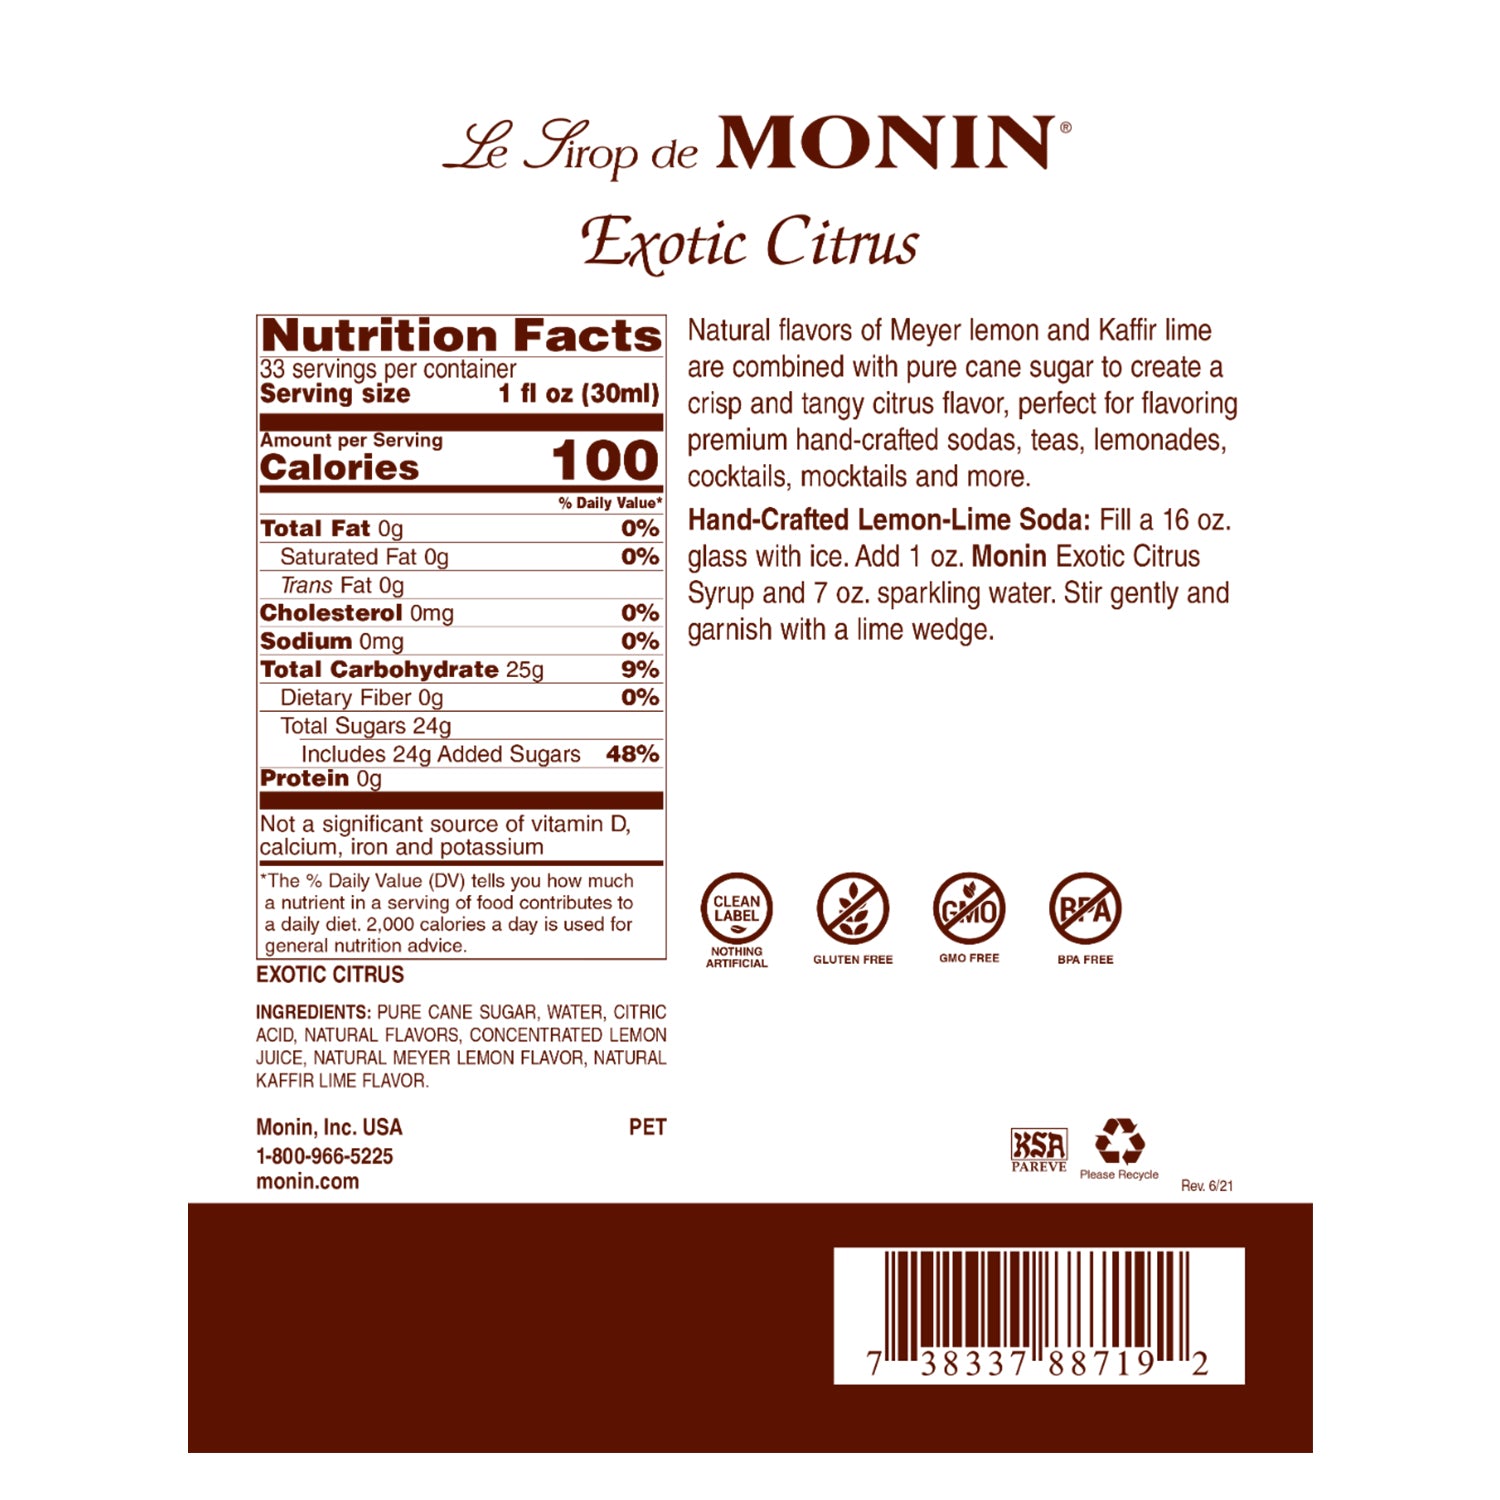 Monin Exotic Citrus Syrup nutrition facts and ingredients label